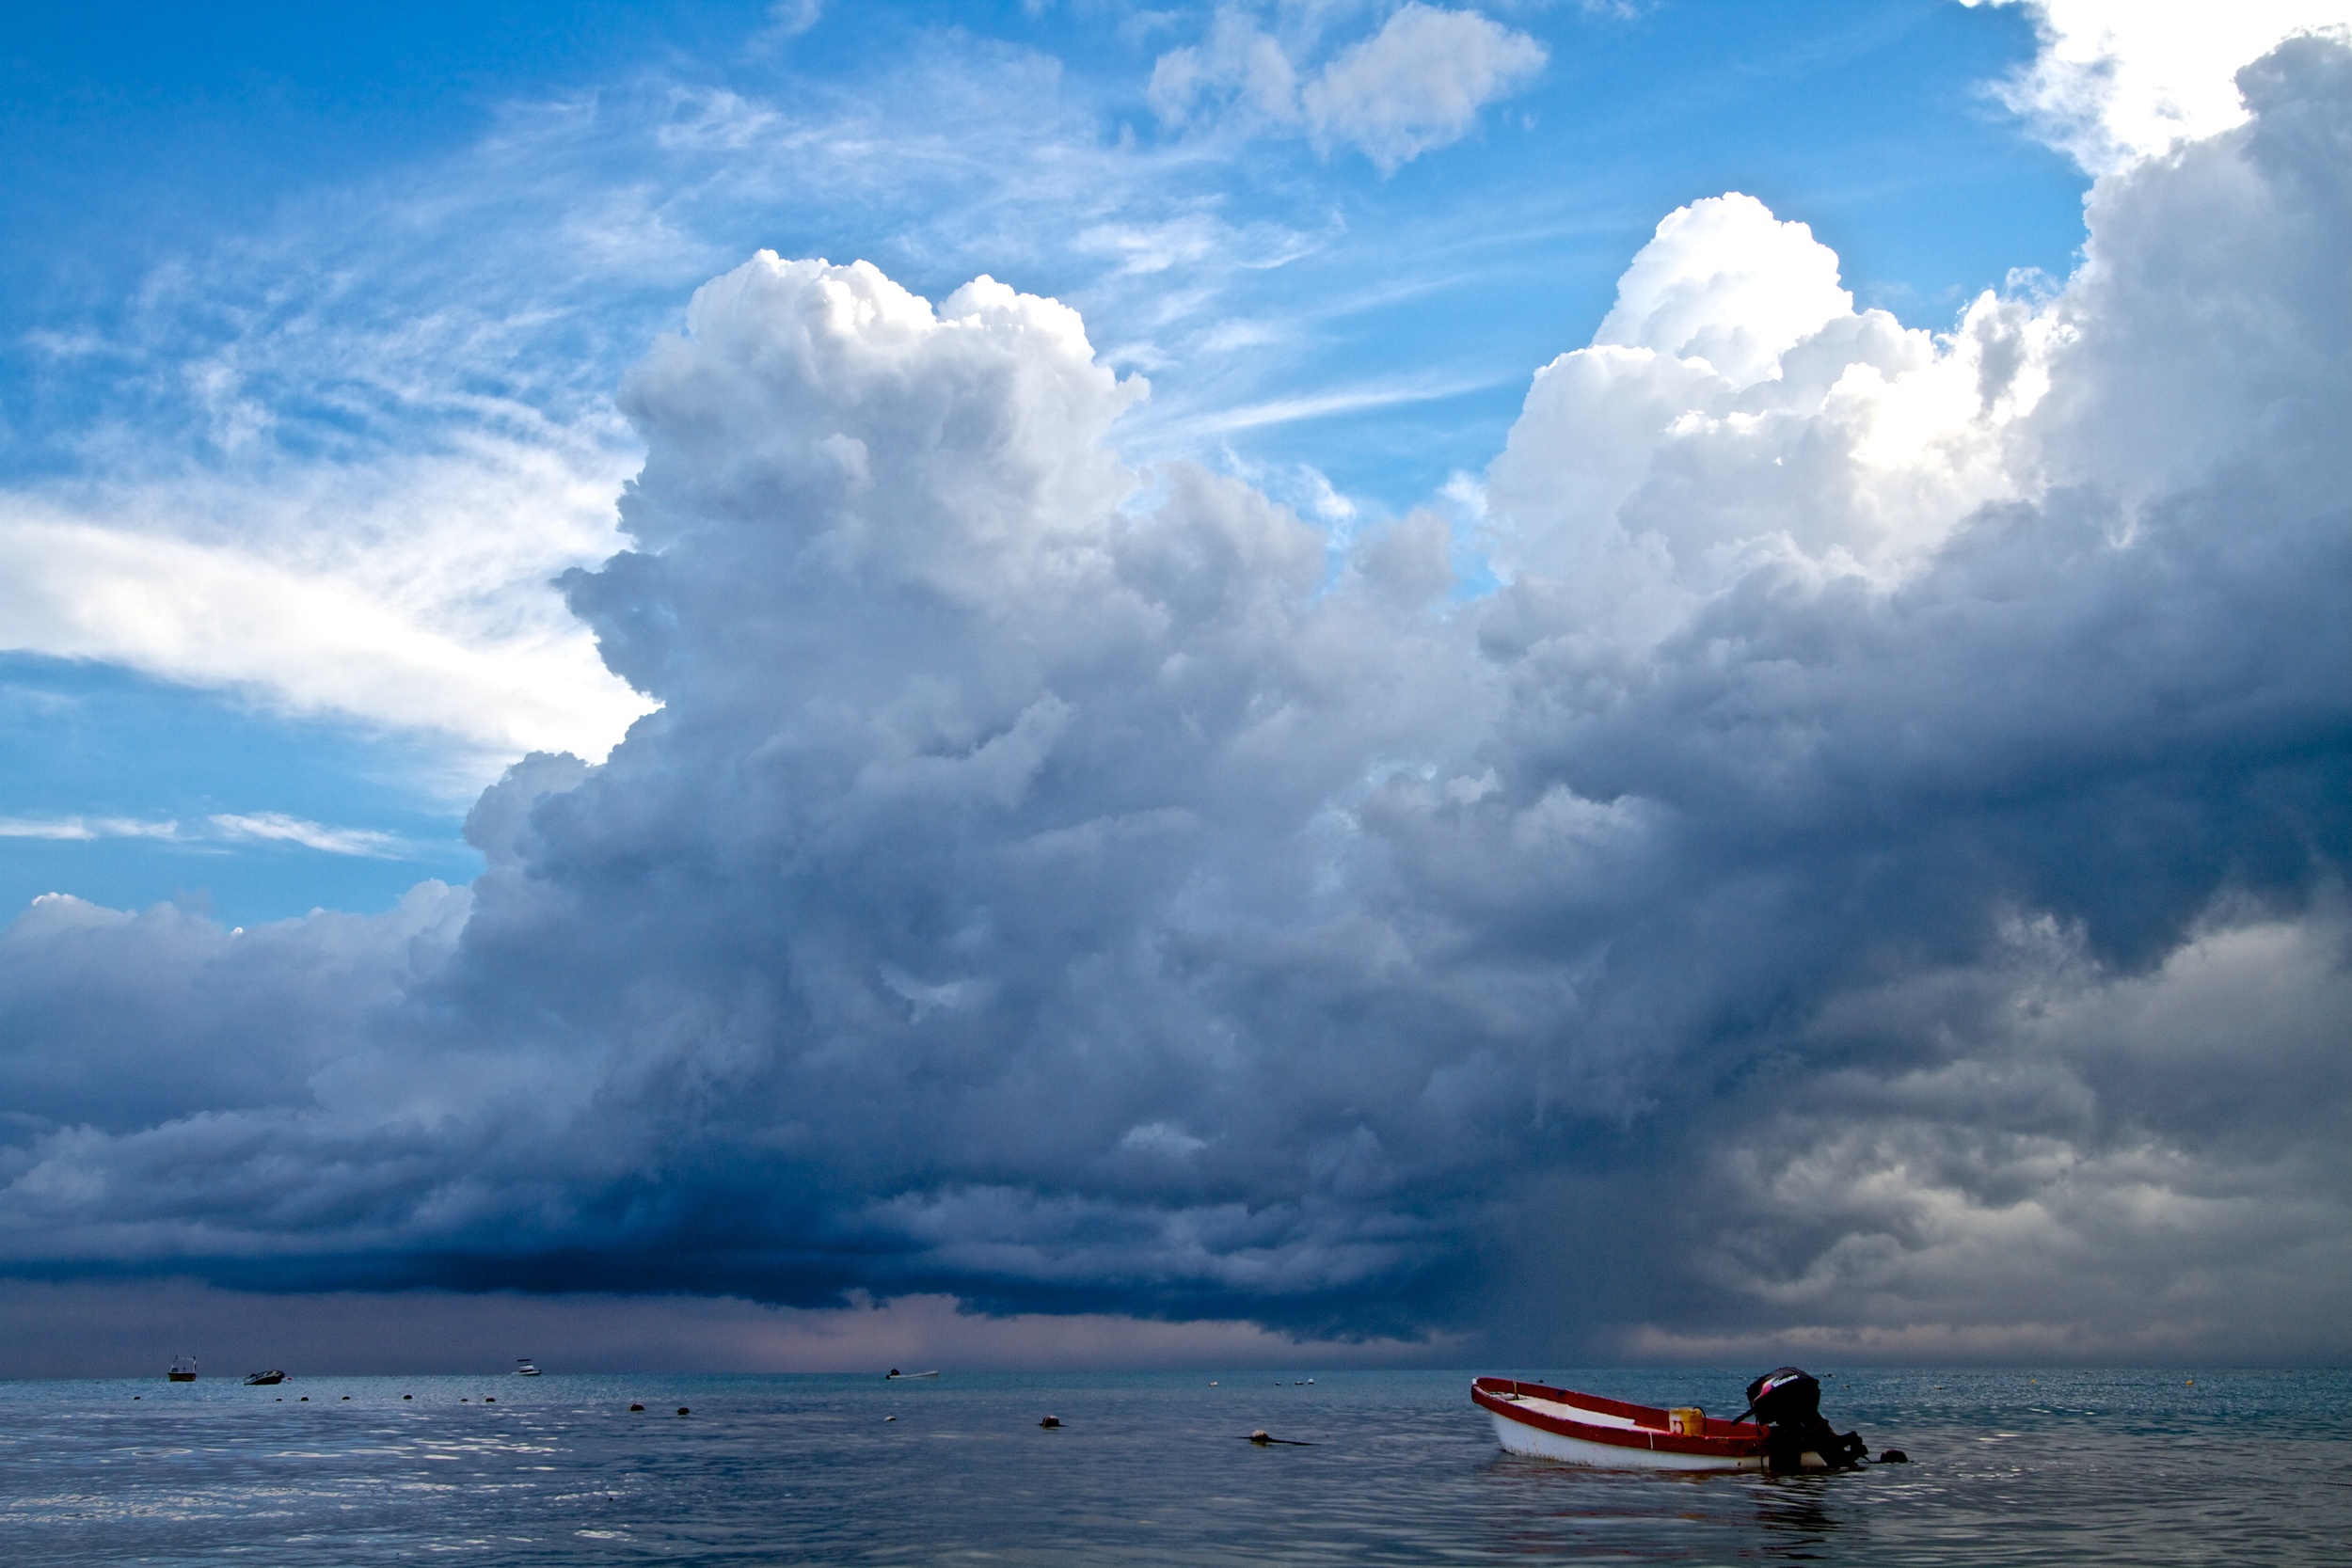 2012-12-27 at 15-04-59 Boats, Seascape, Water, Clouds, Sky, Dramatic, Blue, Ocean, Storm.jpg